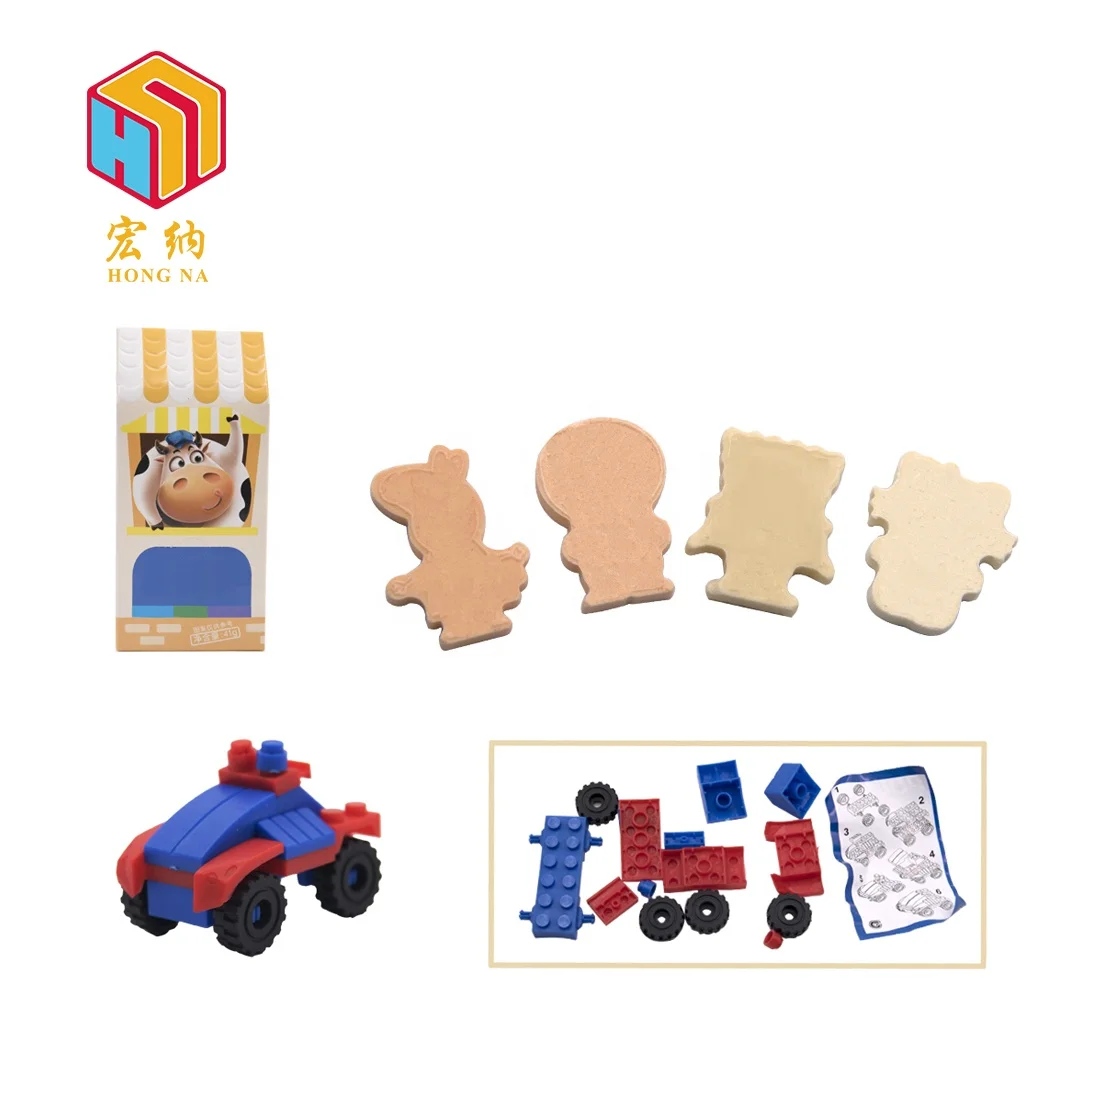 
OEM service compression dry milk chewy candy with assembly toys  (62416291901)